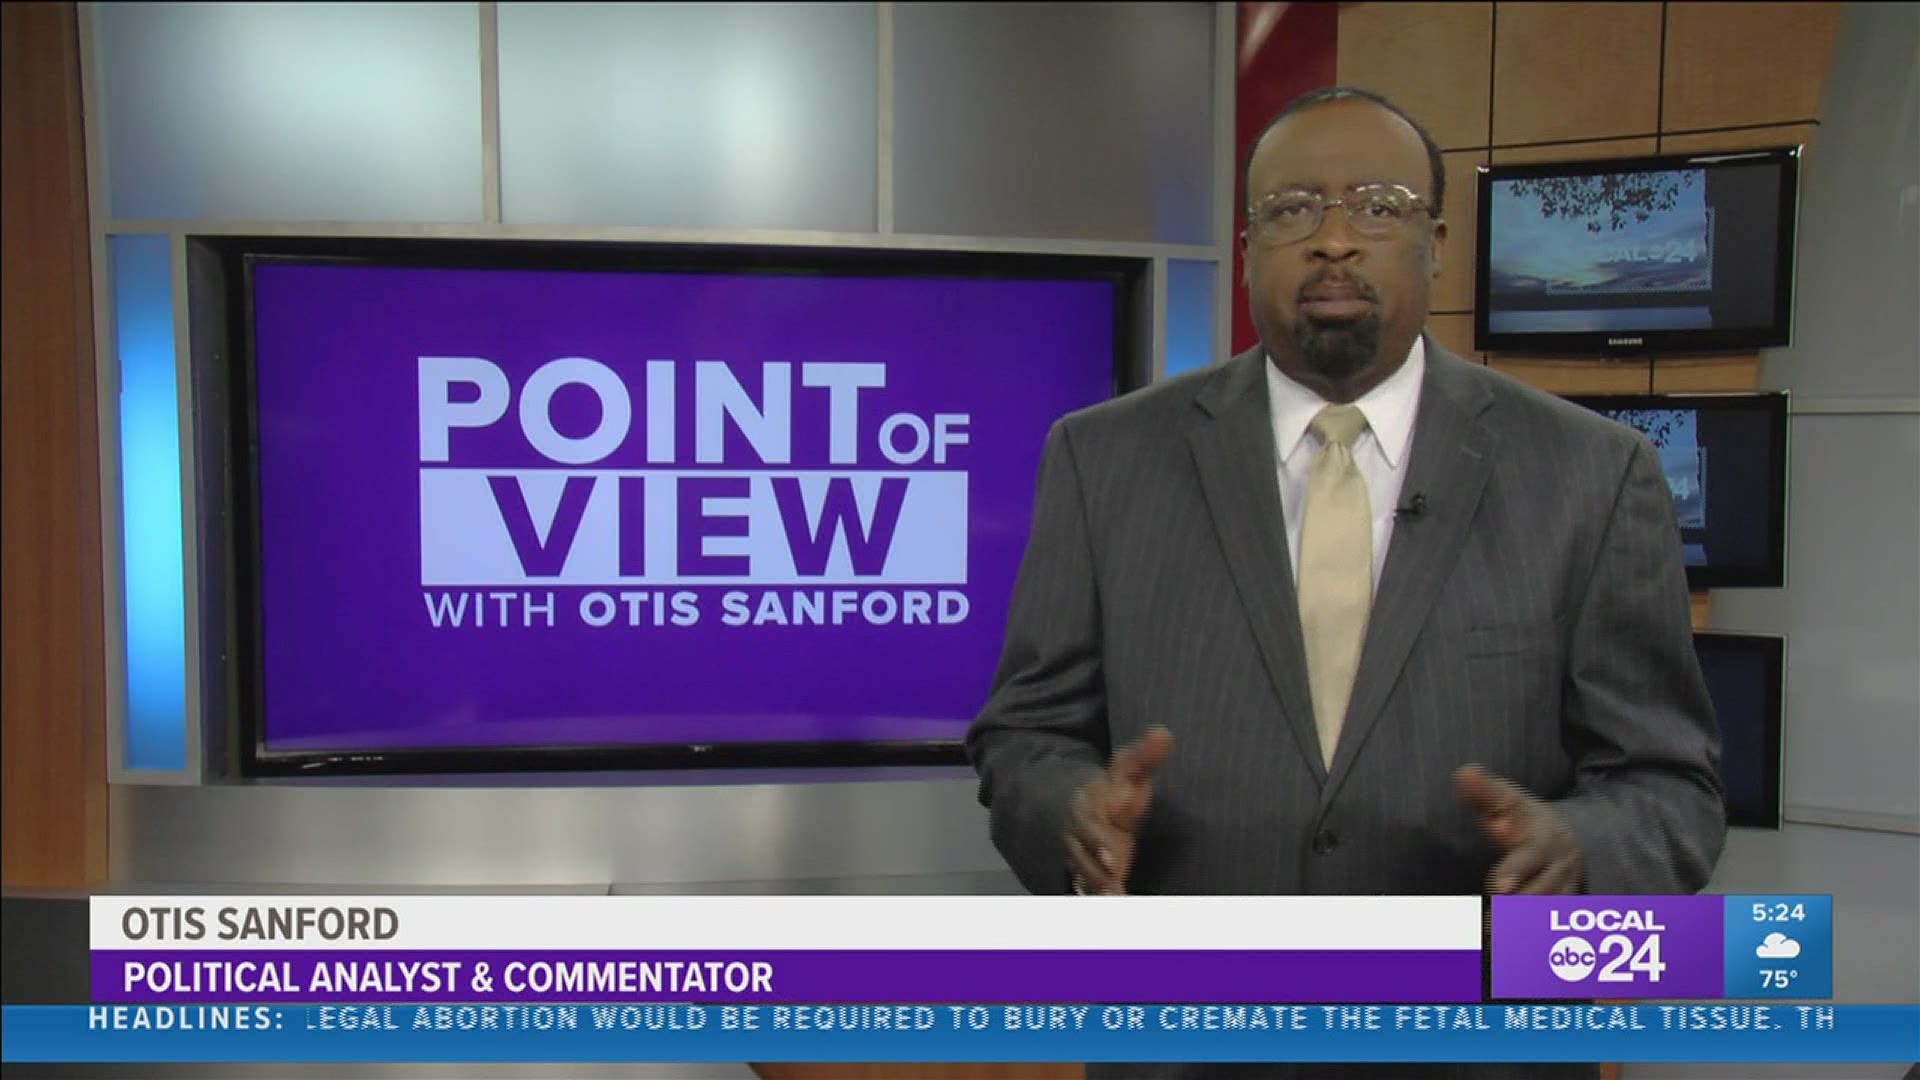 Local 24 News political analyst and commentator Otis Sanford shares his point of view on the cost of the Liberty Park project at the former fairgrounds.